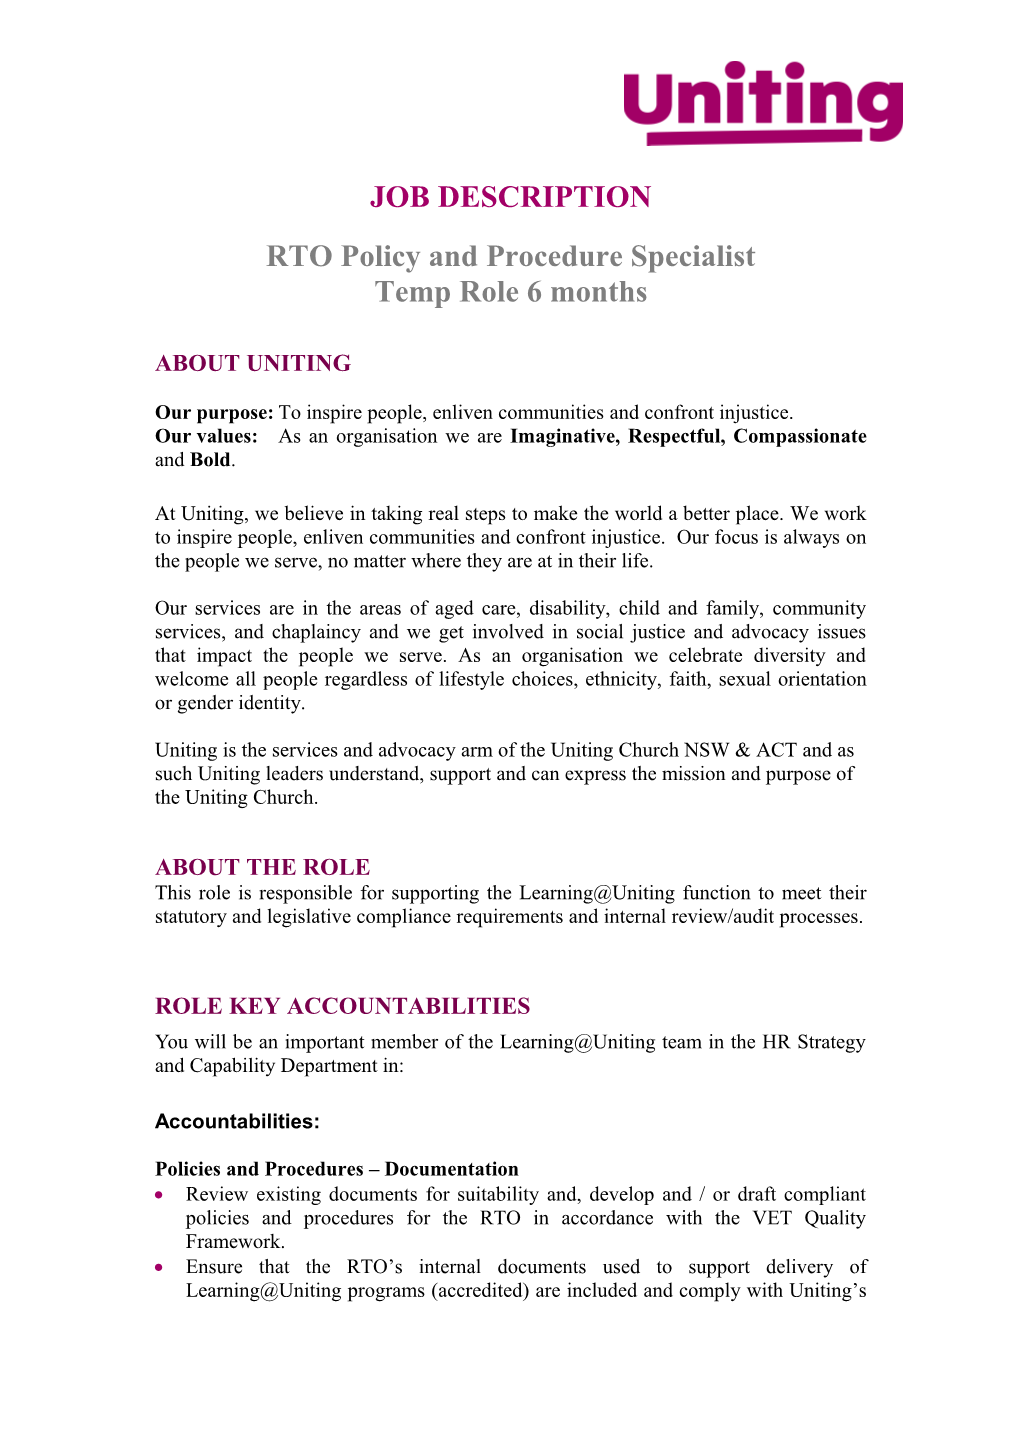 RTO Policy and Procedure Specialist